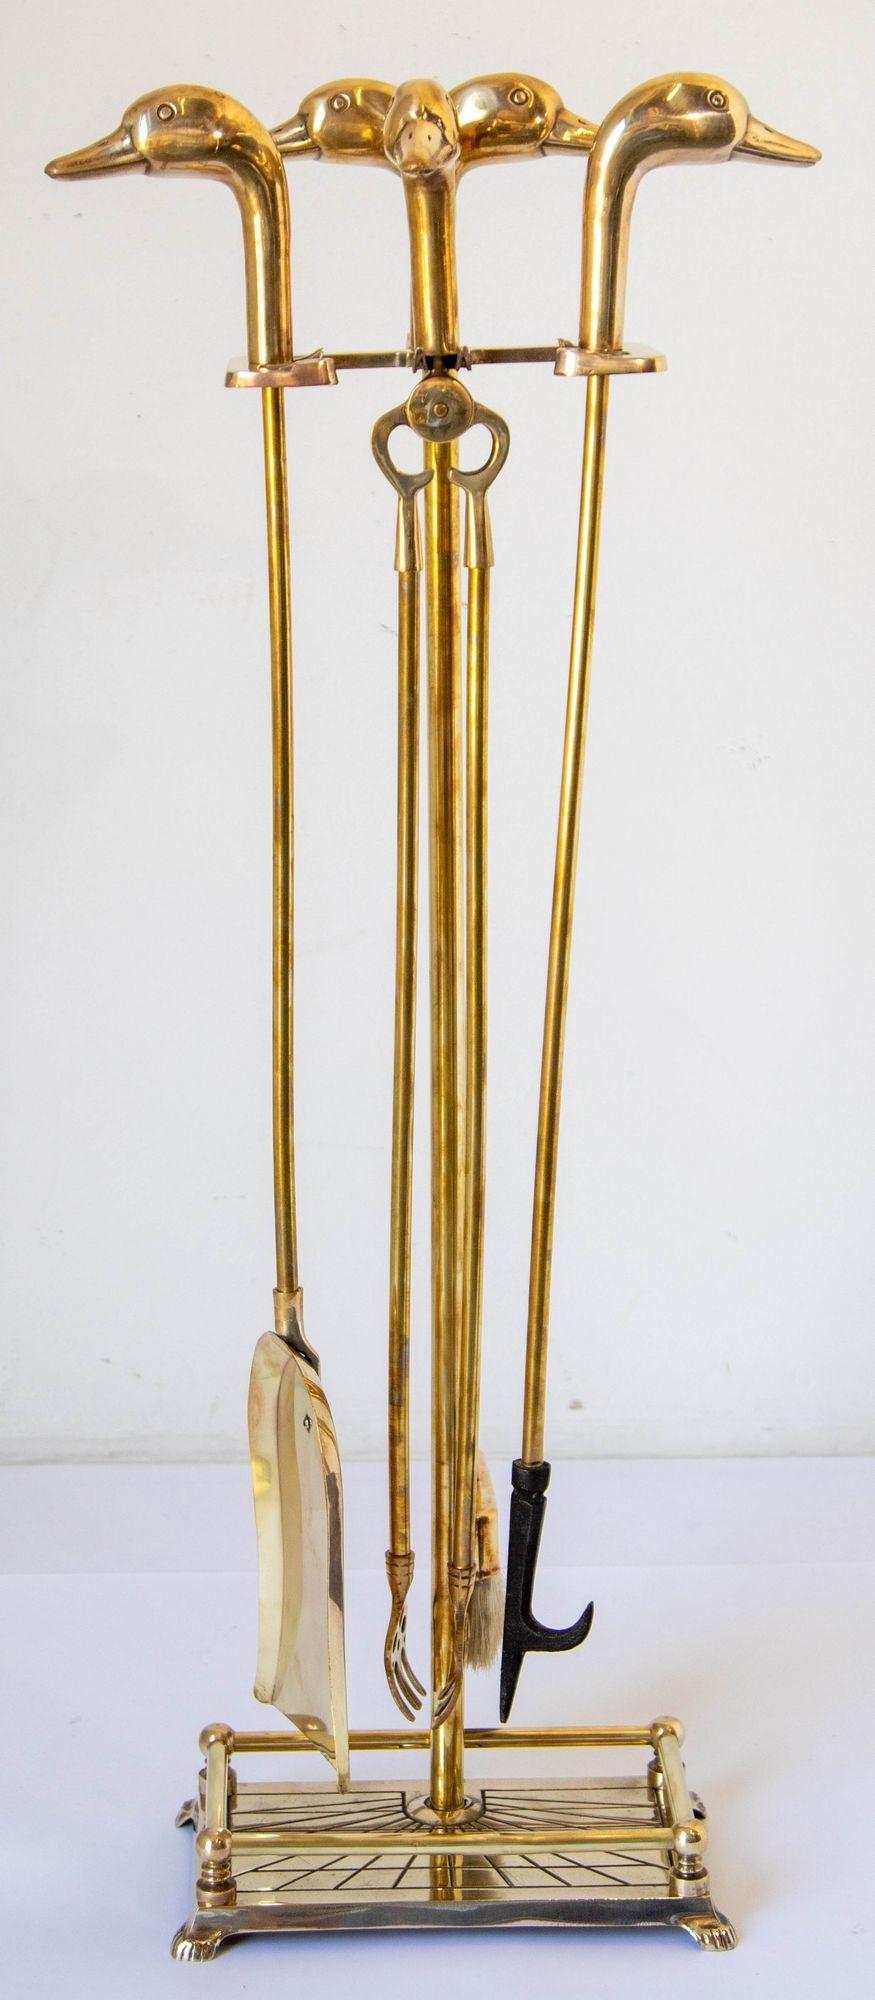 Fireplace Tools With Duck Heads - 5 For Sale on 1stDibs  brass duck head  fireplace tools, brass duck fireplace tools, duck with head on fire